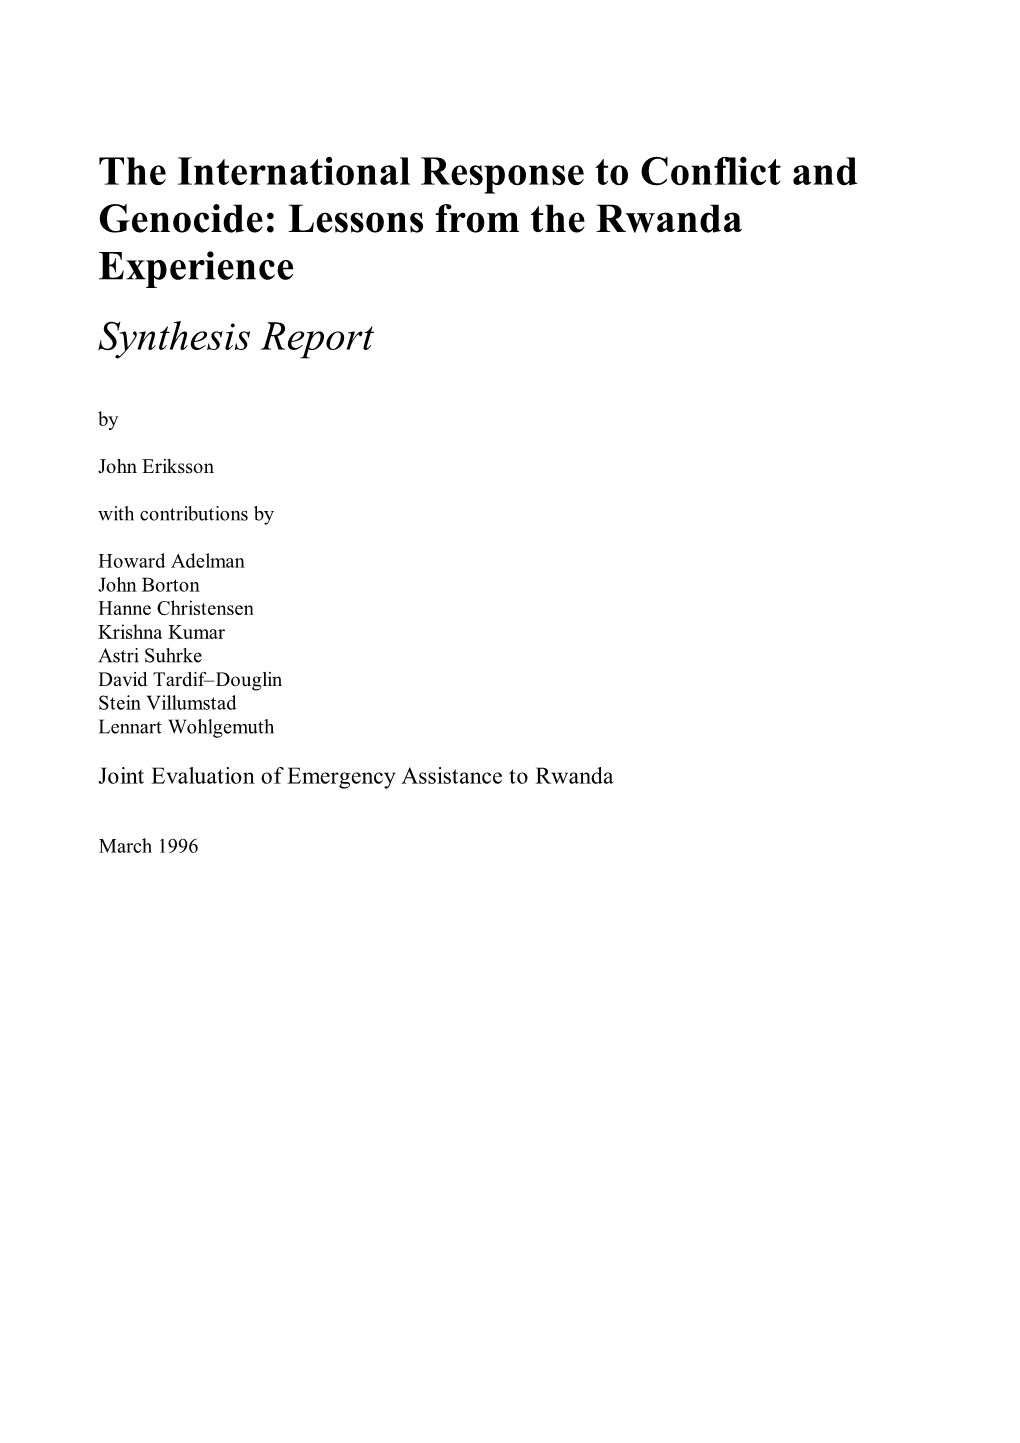 The International Response to Conflict and Genocide: Lessons from the Rwanda Experience Synthesis Report By